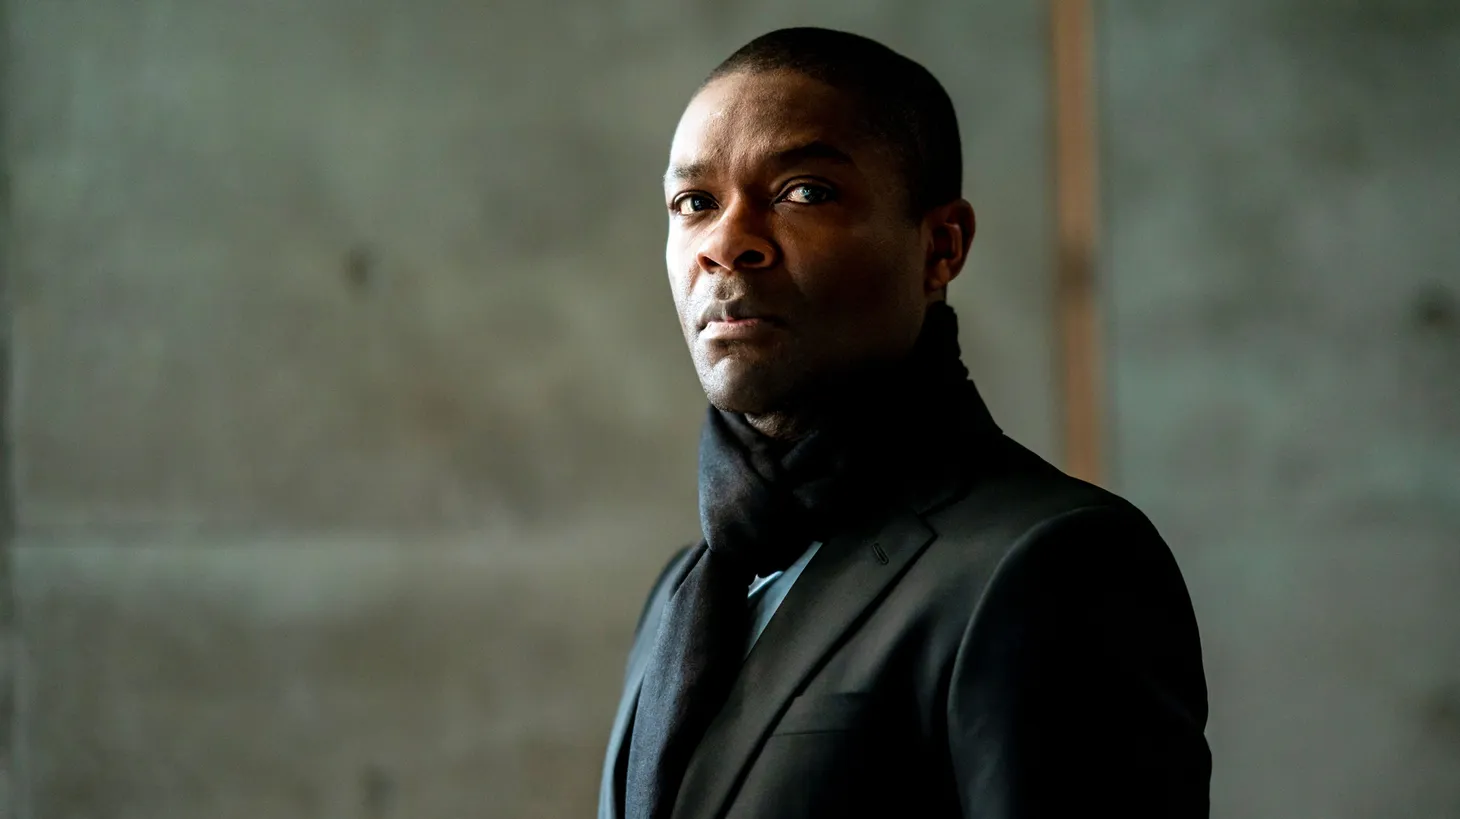 “He is a very complicated human being. When it comes to being a controlling individual, he is a full 10 out of 10,” David Oyelowo says of his character Edward Monkford in the new film “The Girl Before.”